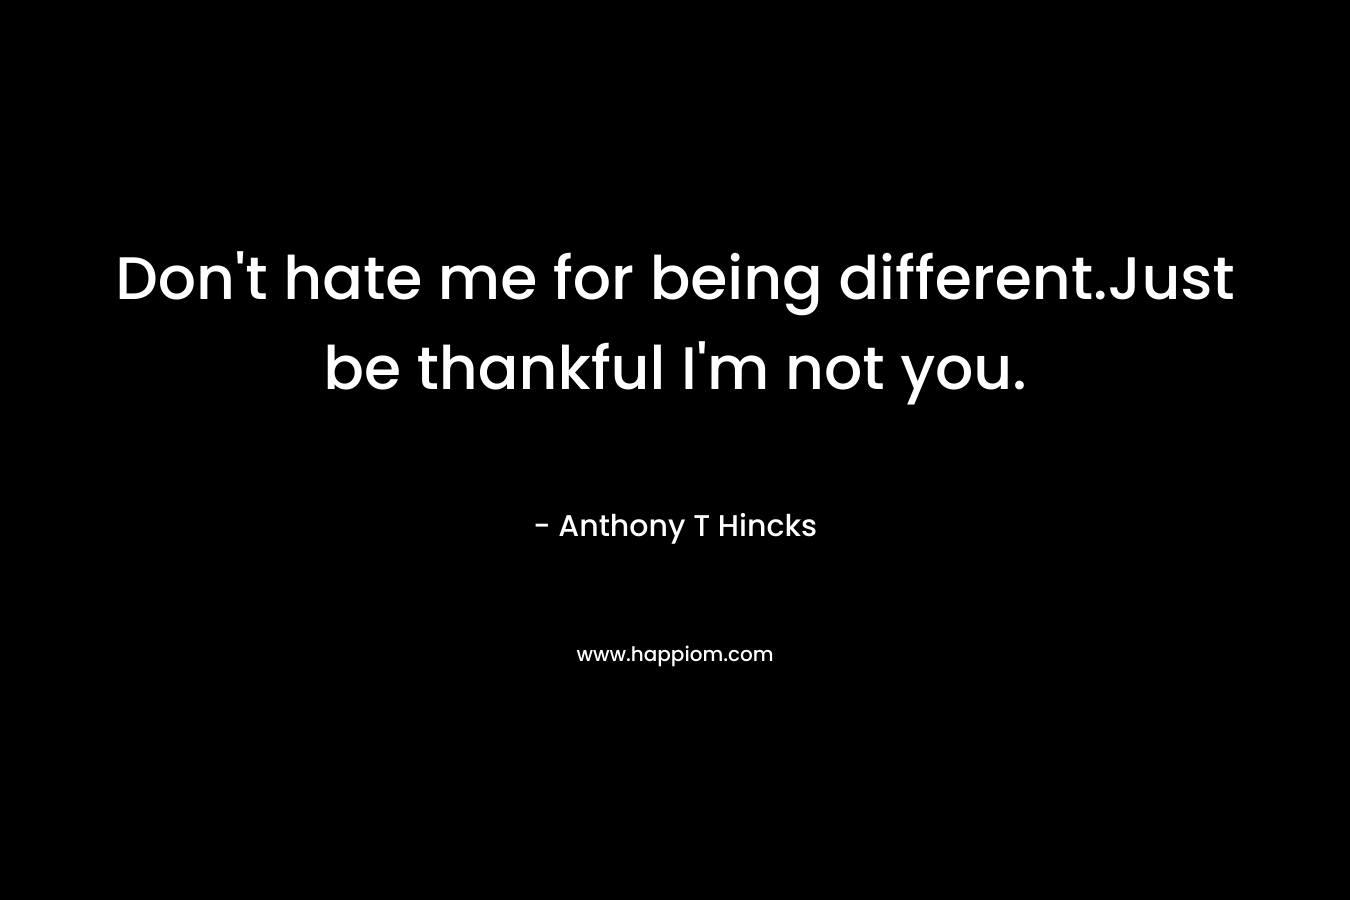 Don't hate me for being different.Just be thankful I'm not you.